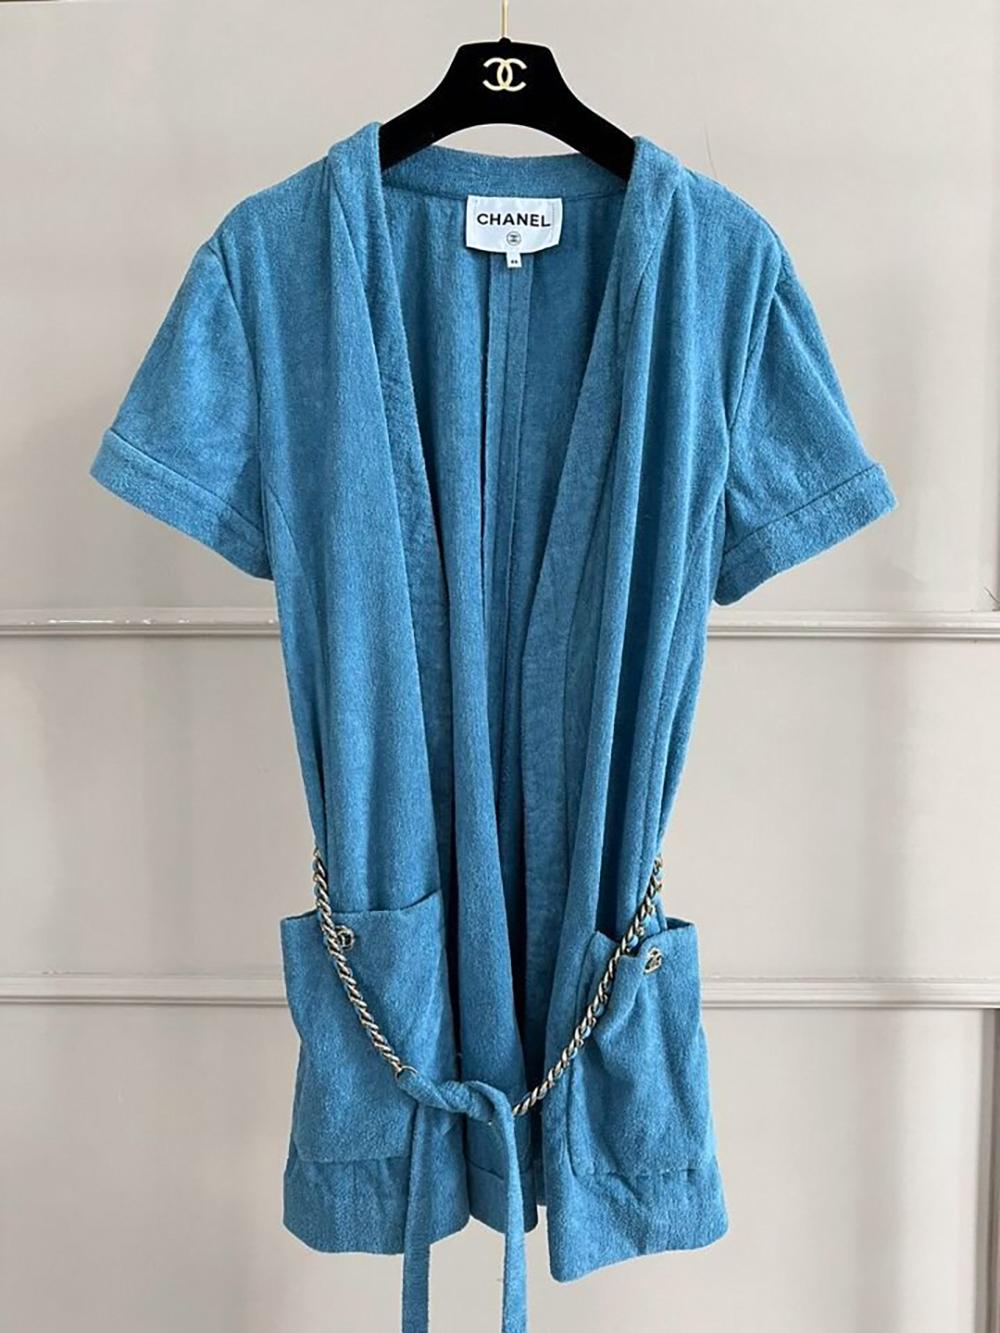 Turquoise terry jacket / tunic dress with chain link belt from 2022 Cruise Collection
Size mark 44 FR. Only tried once inhome, condition is pristine, no signs of wear.